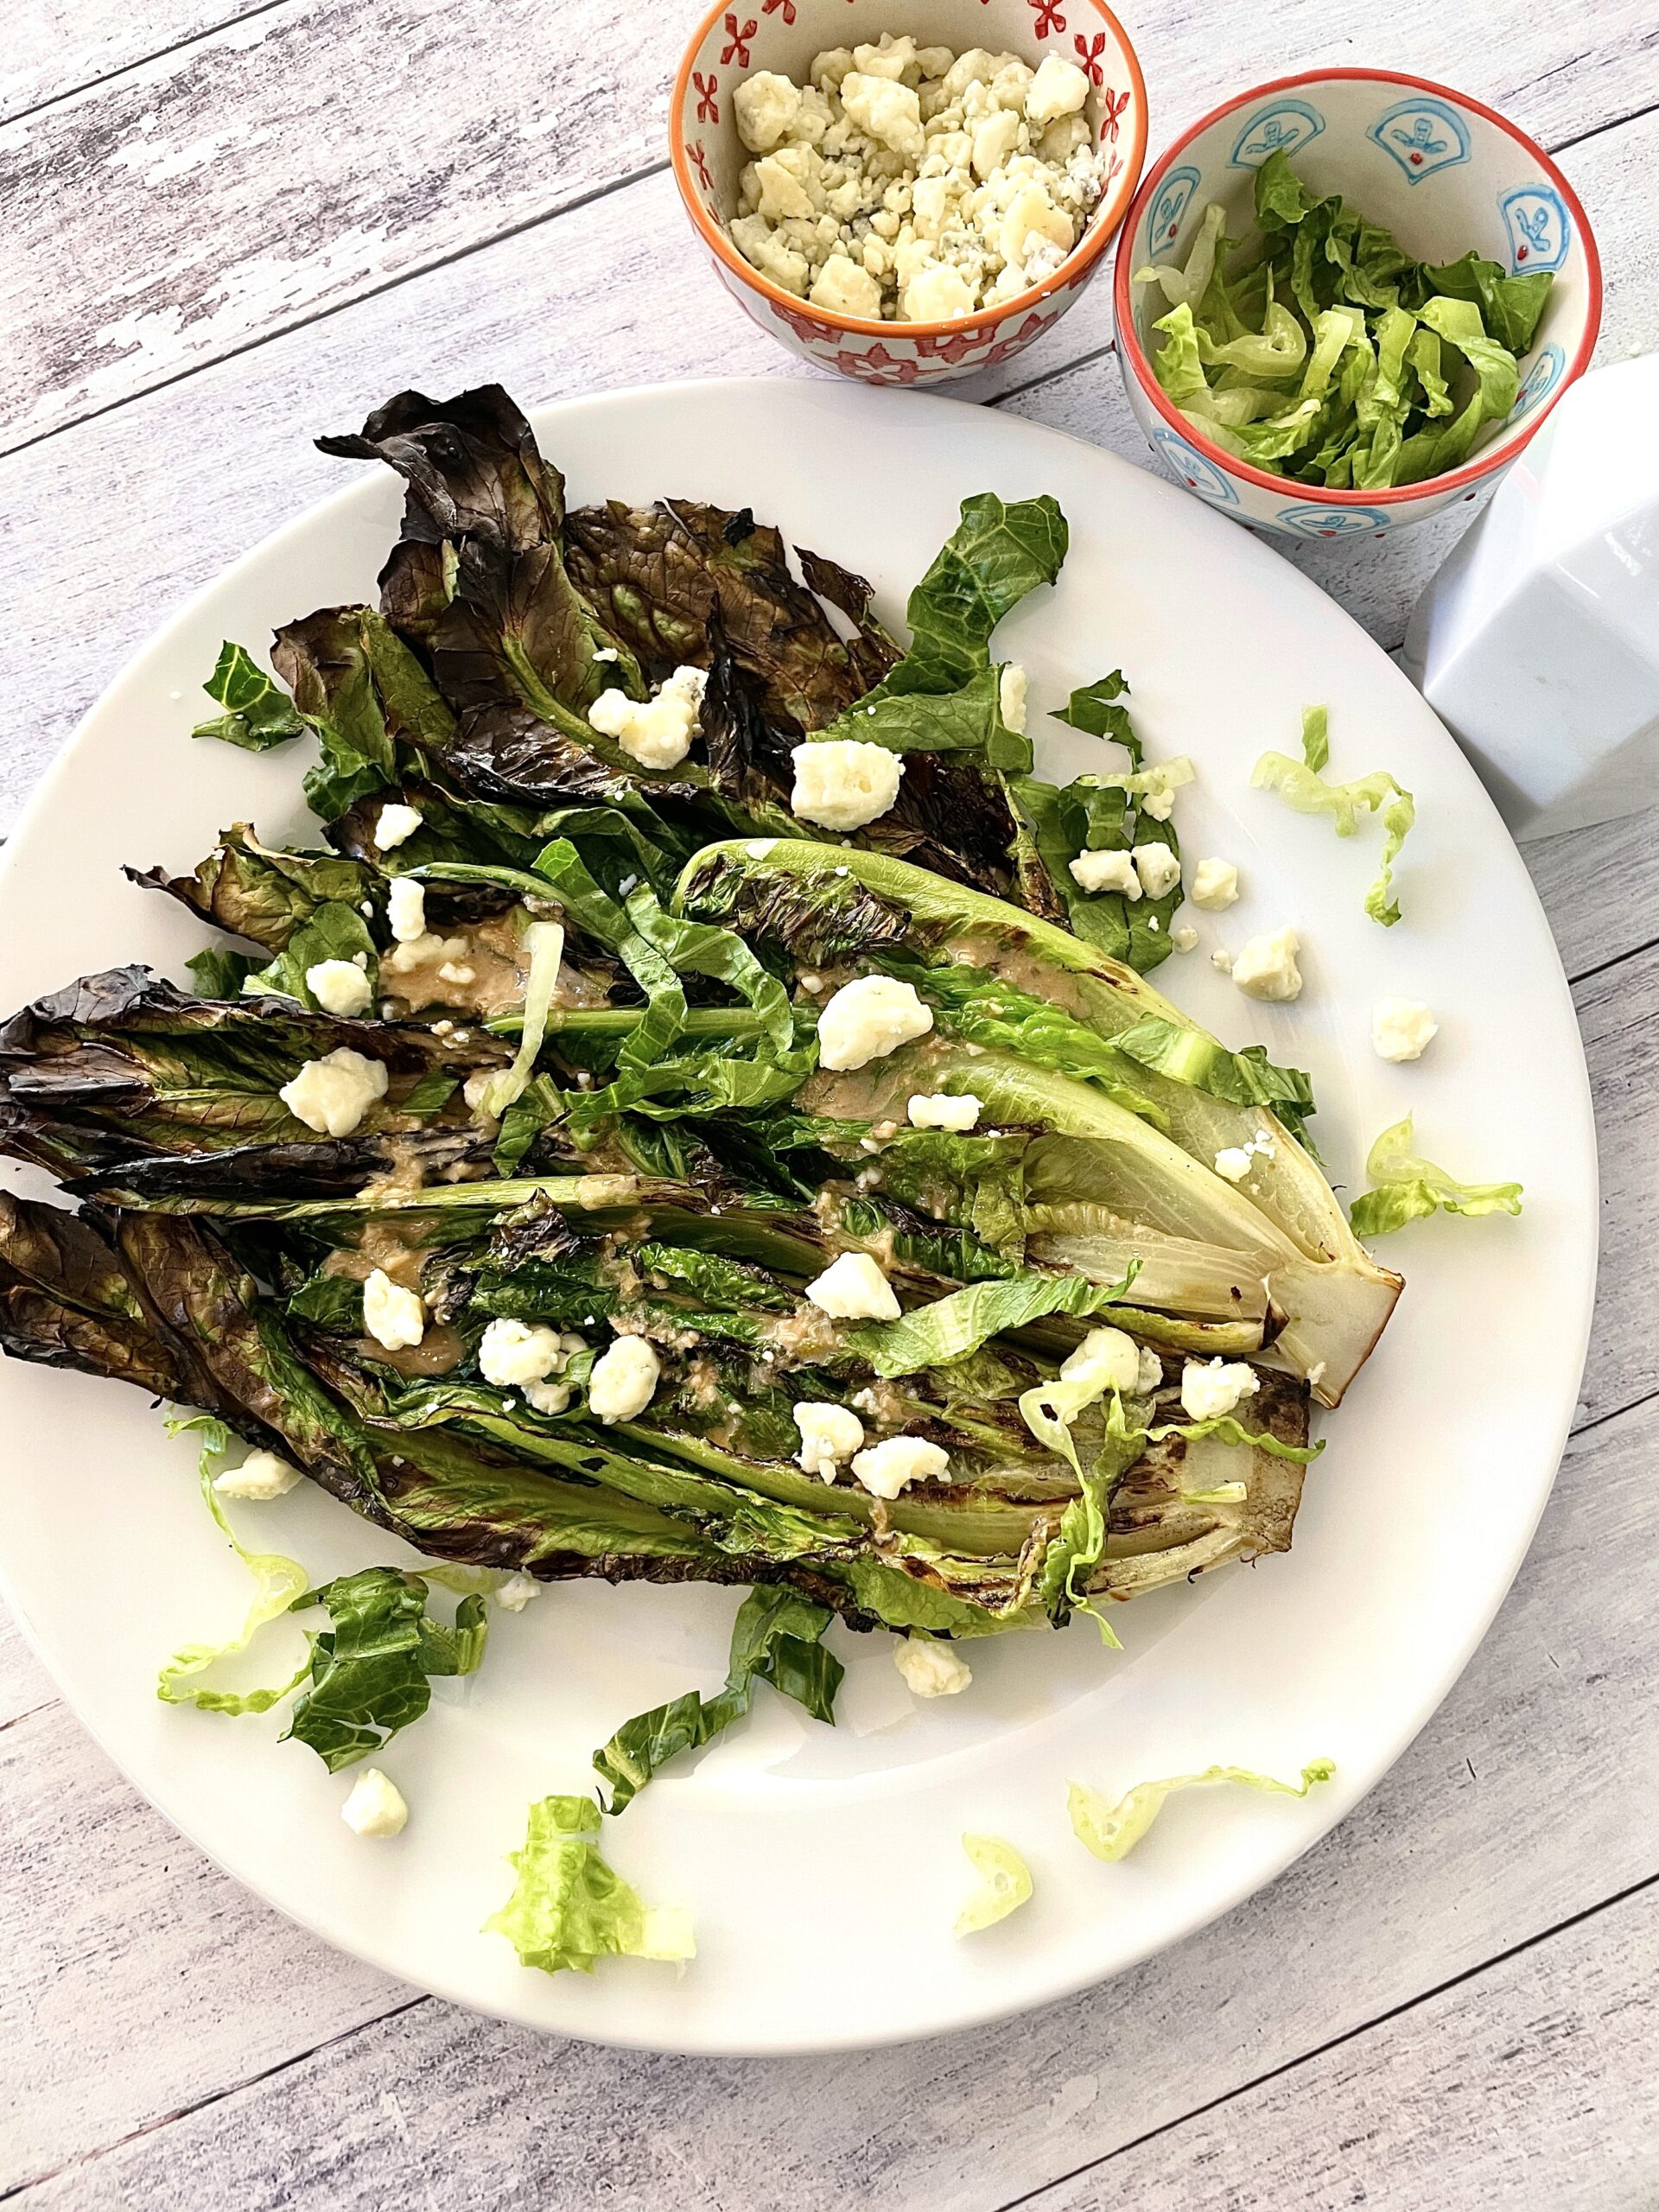 Grilled Romaine Lettuce With Anchovy Vinaigrette And Blue Cheese